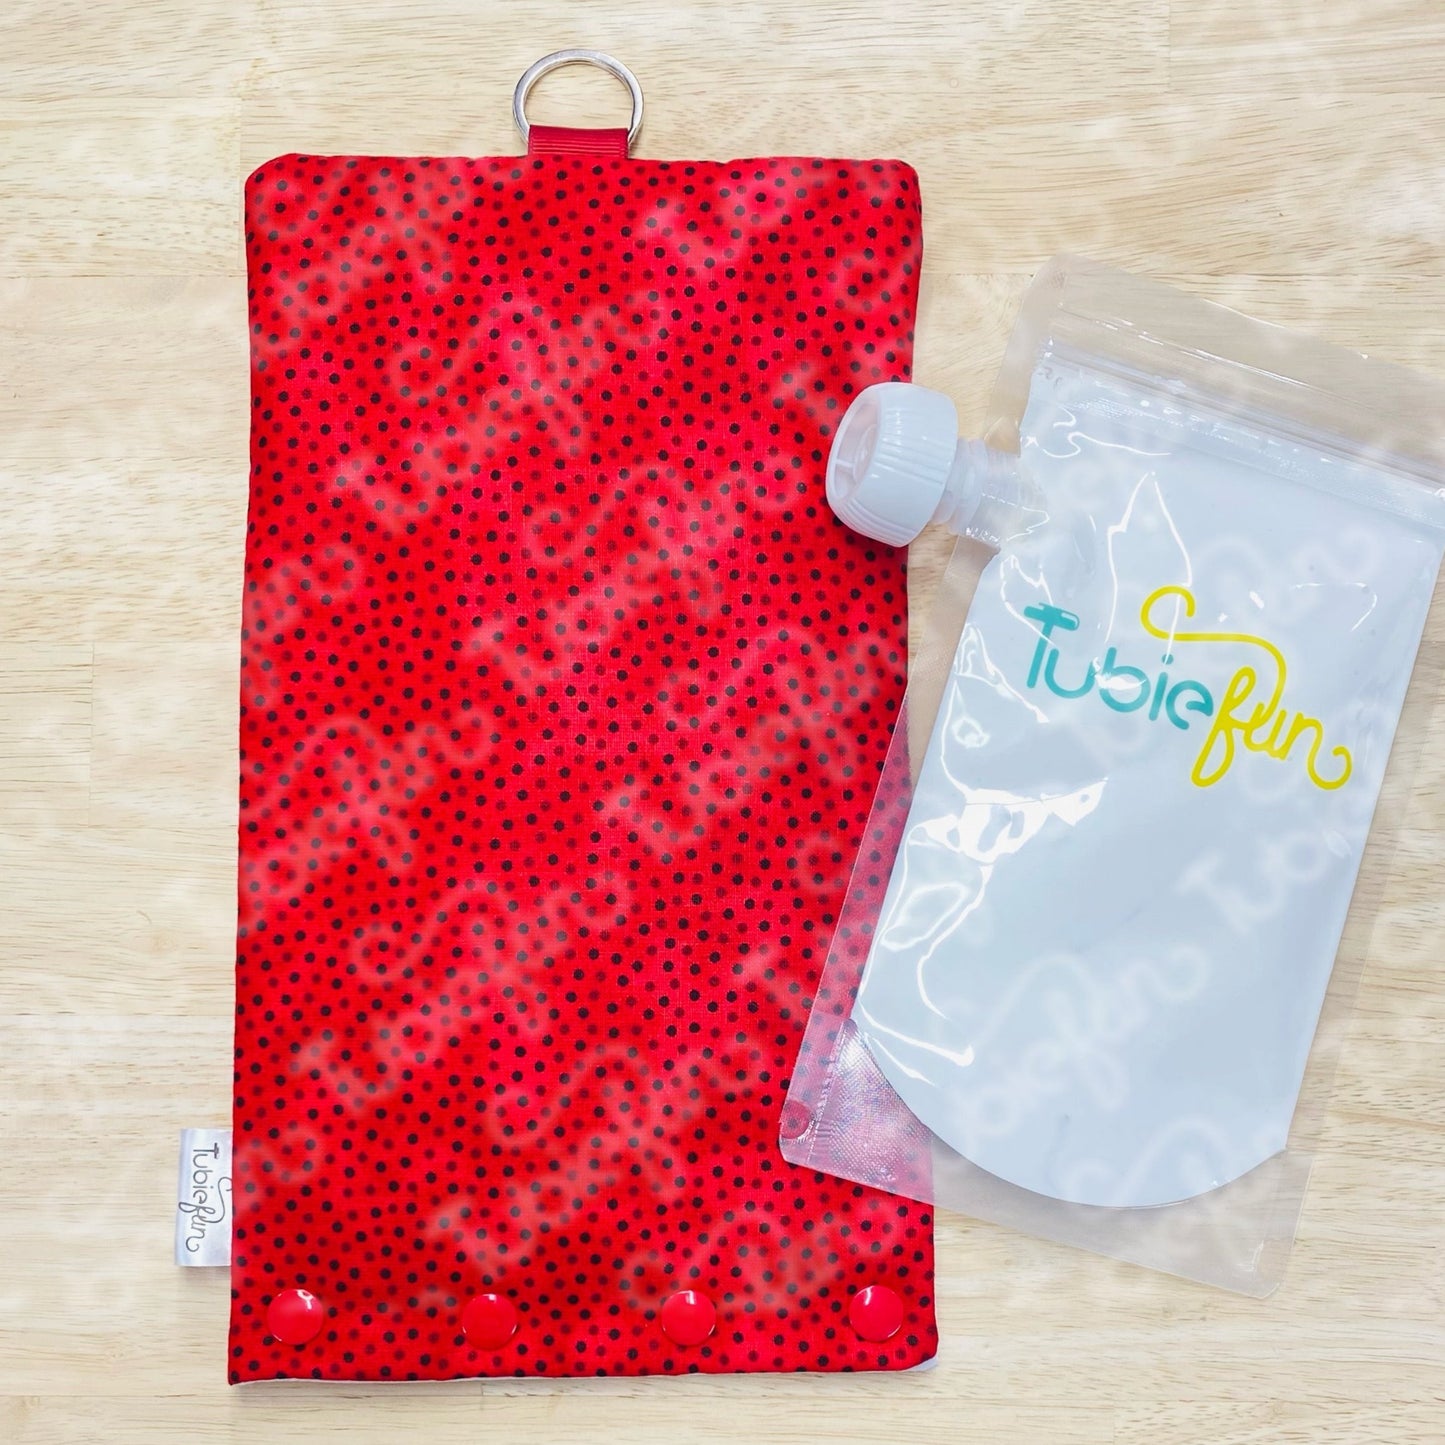 NEW Insulated Milk Bag Suitable for Tubie Fun 500ml Reusable Pouches - Black Dots on Red